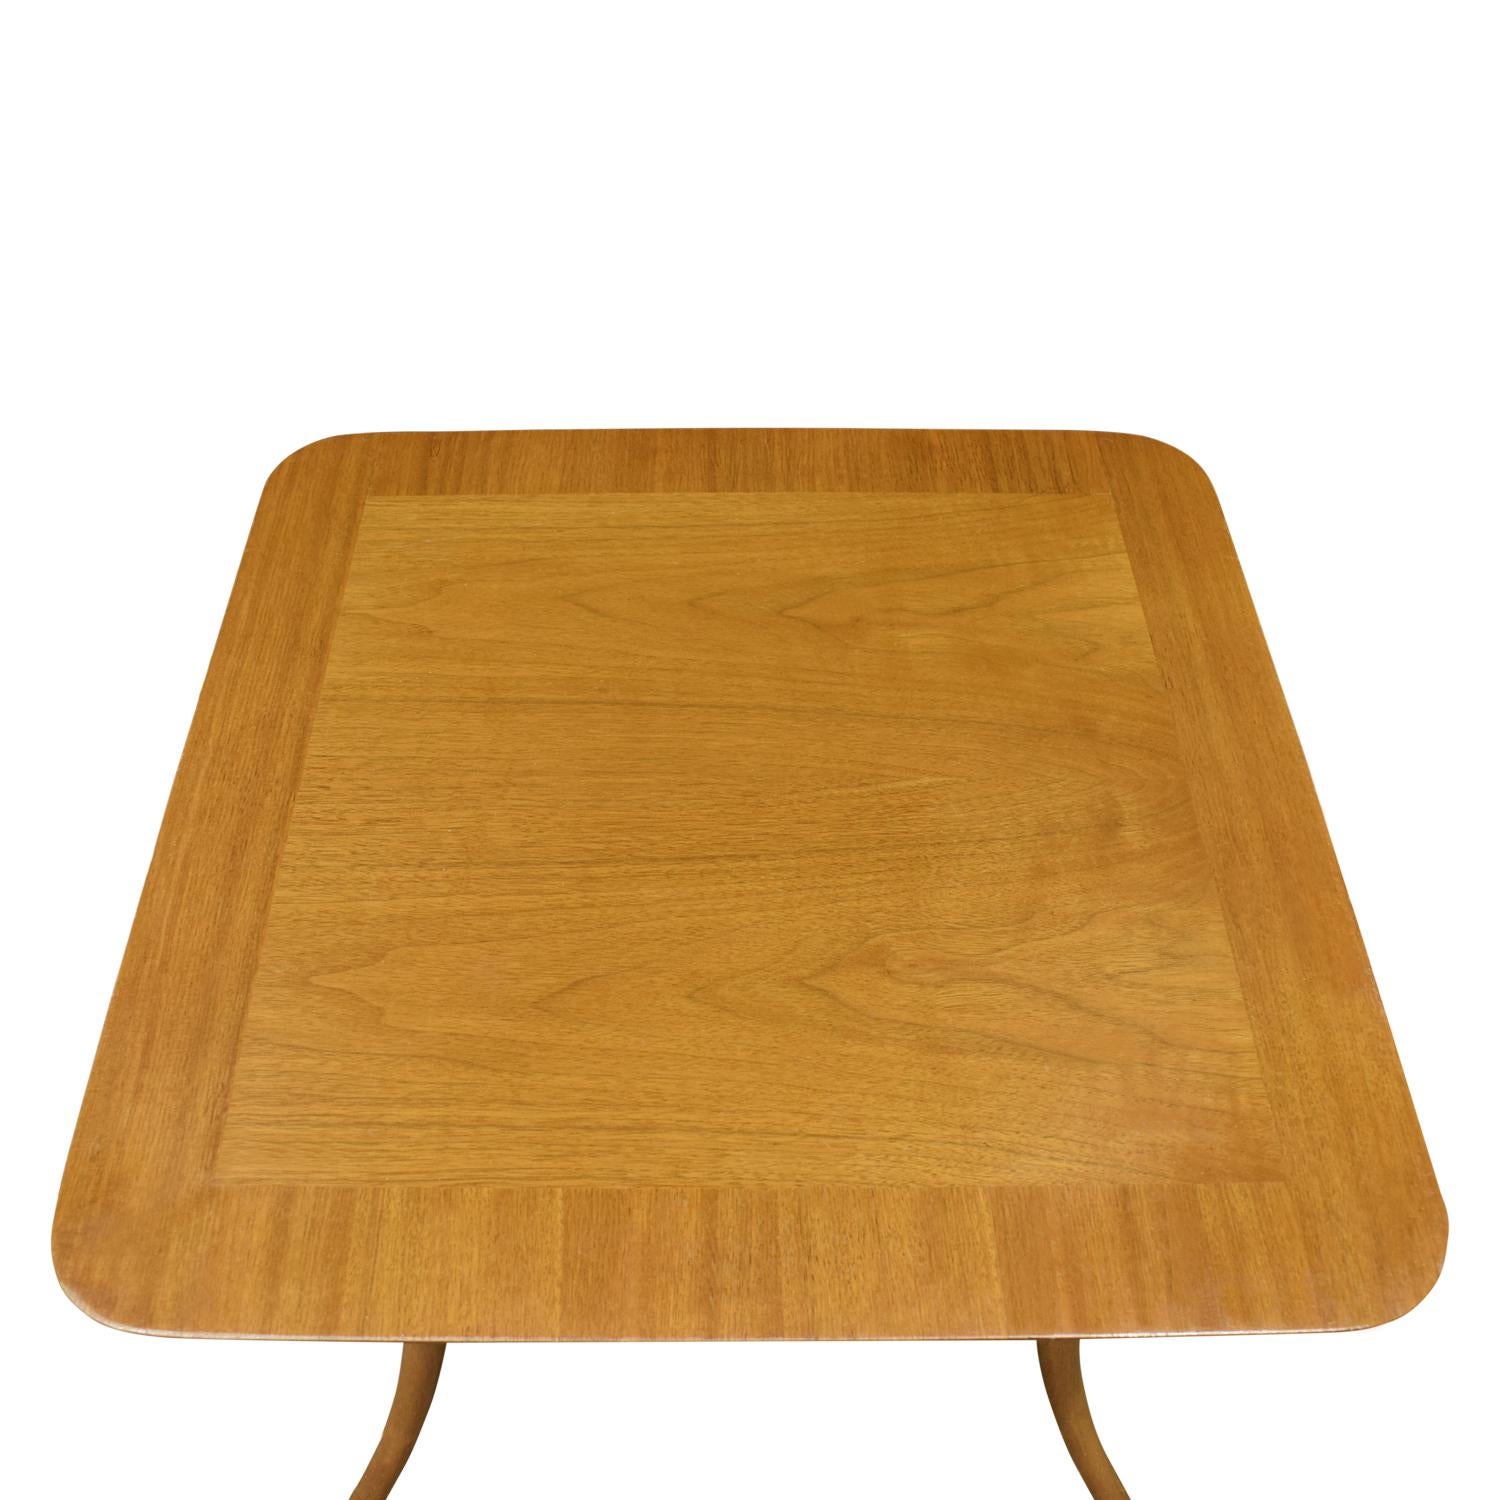 American T.H. Robsjohn-Gibbings End Table in Walnut with Klismos Legs, 1956 'Signed' For Sale